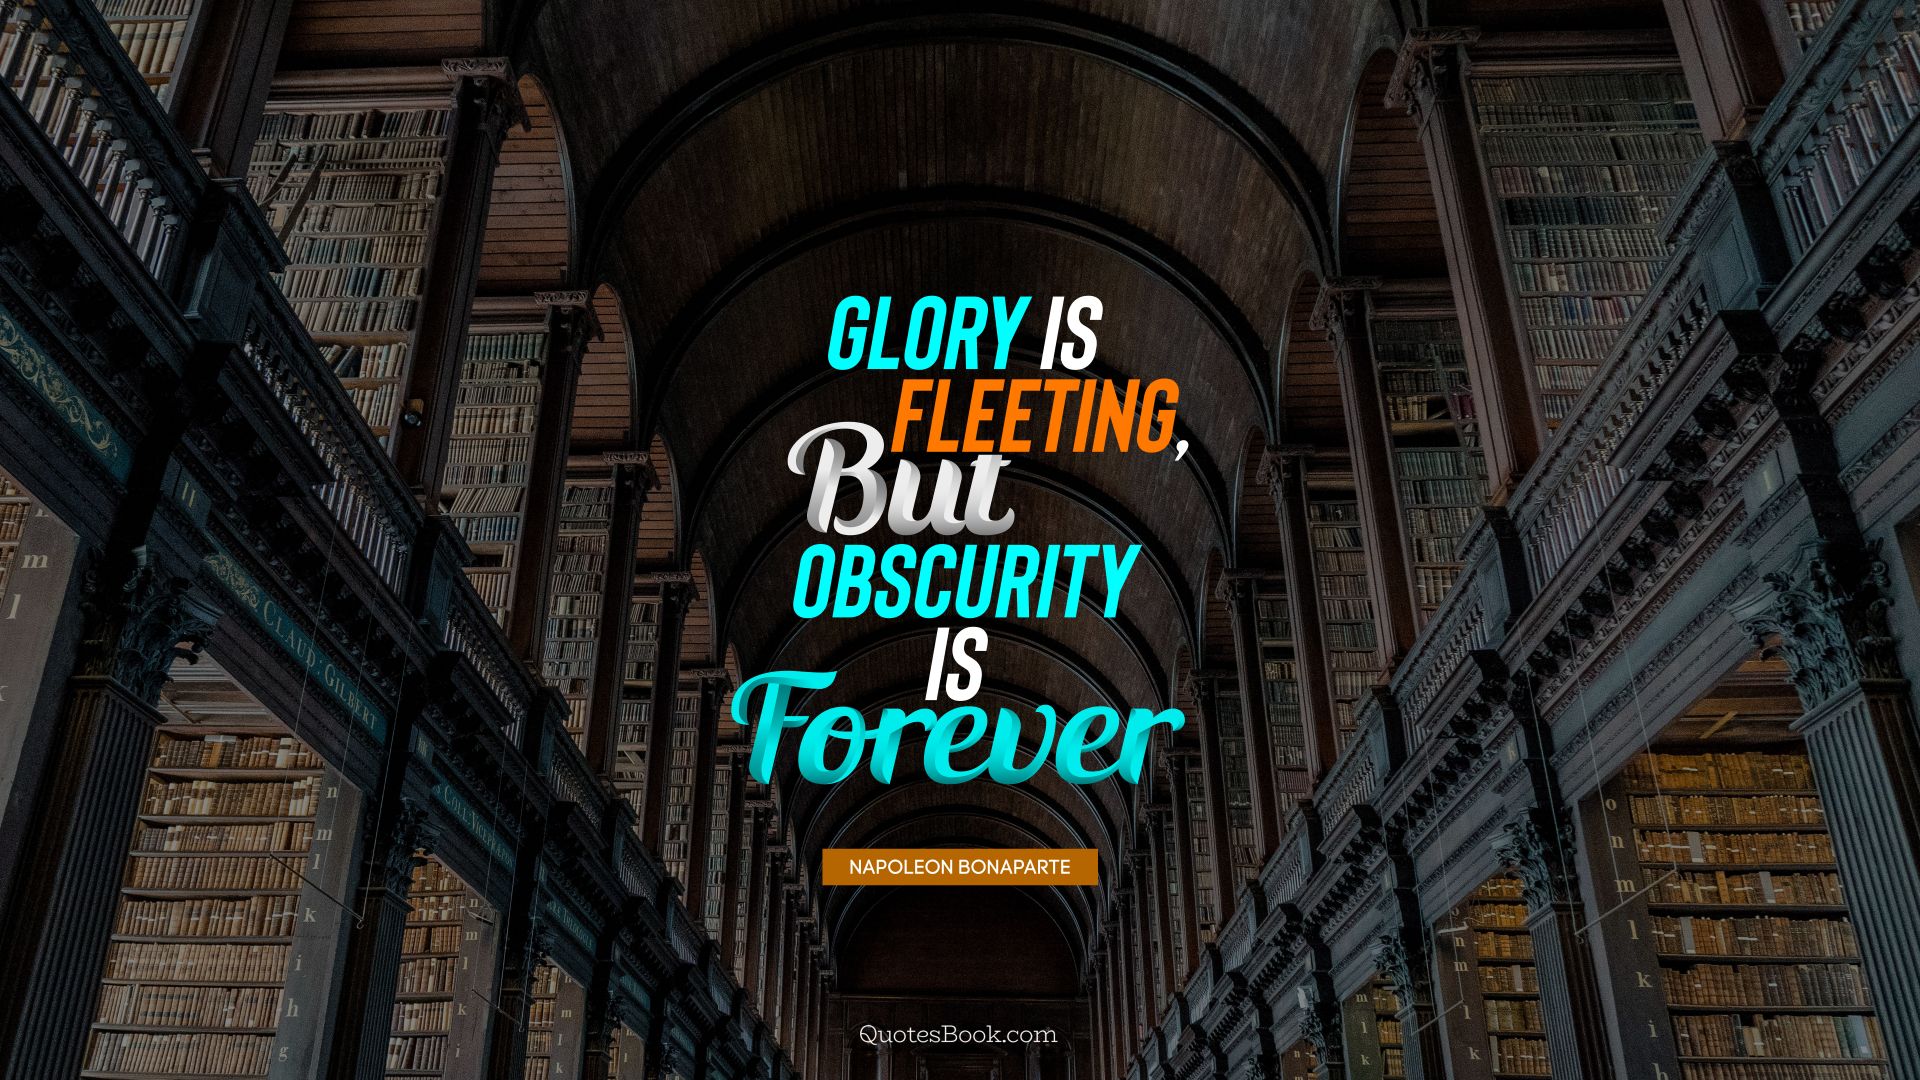 Glory is fleeting, but obscurity is forever. - Quote by Napoleon Bonaparte